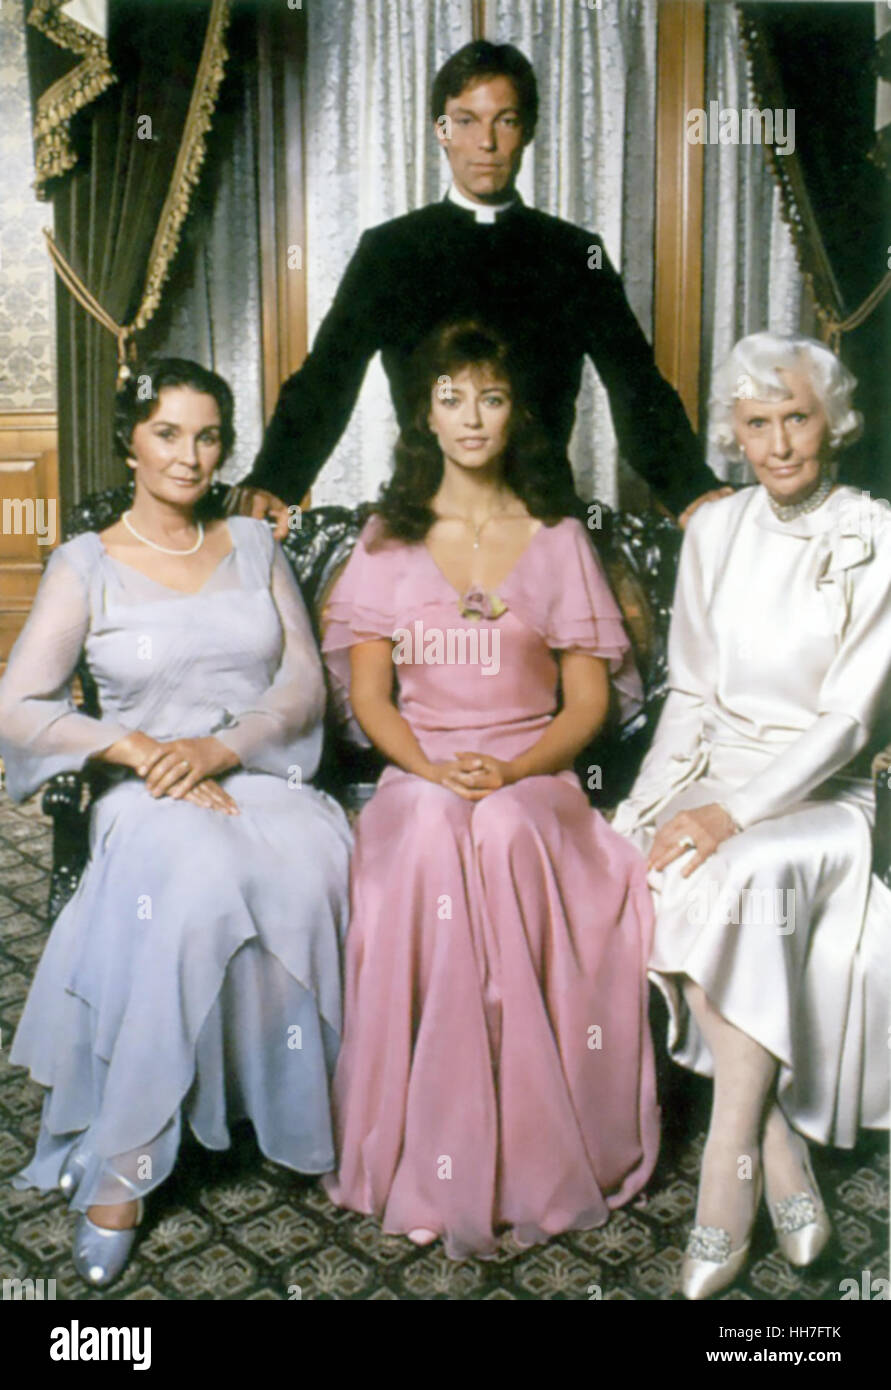 THE THORN BIRDS  Warner Bros TV mini-series in 1983 with Richard Chamberlain and from left: Jean Simmons, Rachel Ward, Barbara Stanwyck Stock Photo